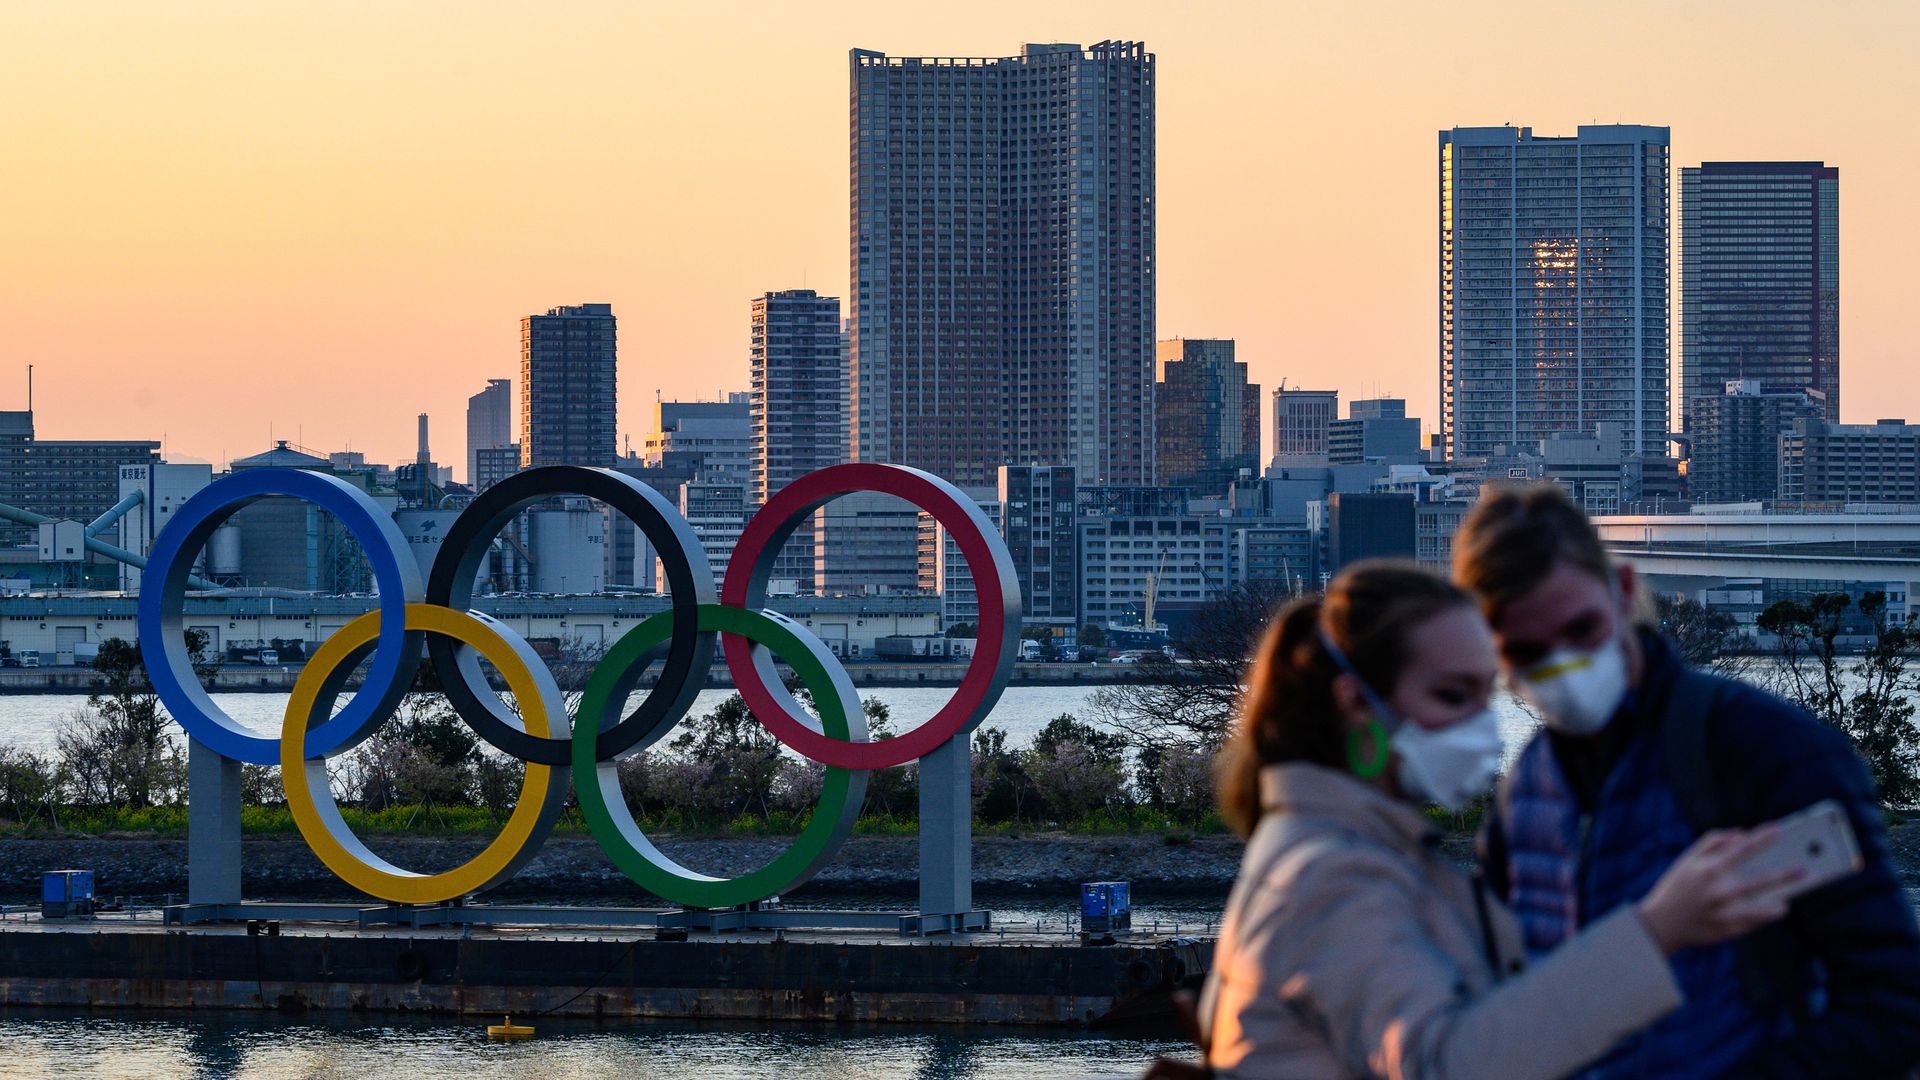 People wear face masks as they take pictures in front of the Olympic Rings at the Odaiba Seaside Park in Tokyo on March 6